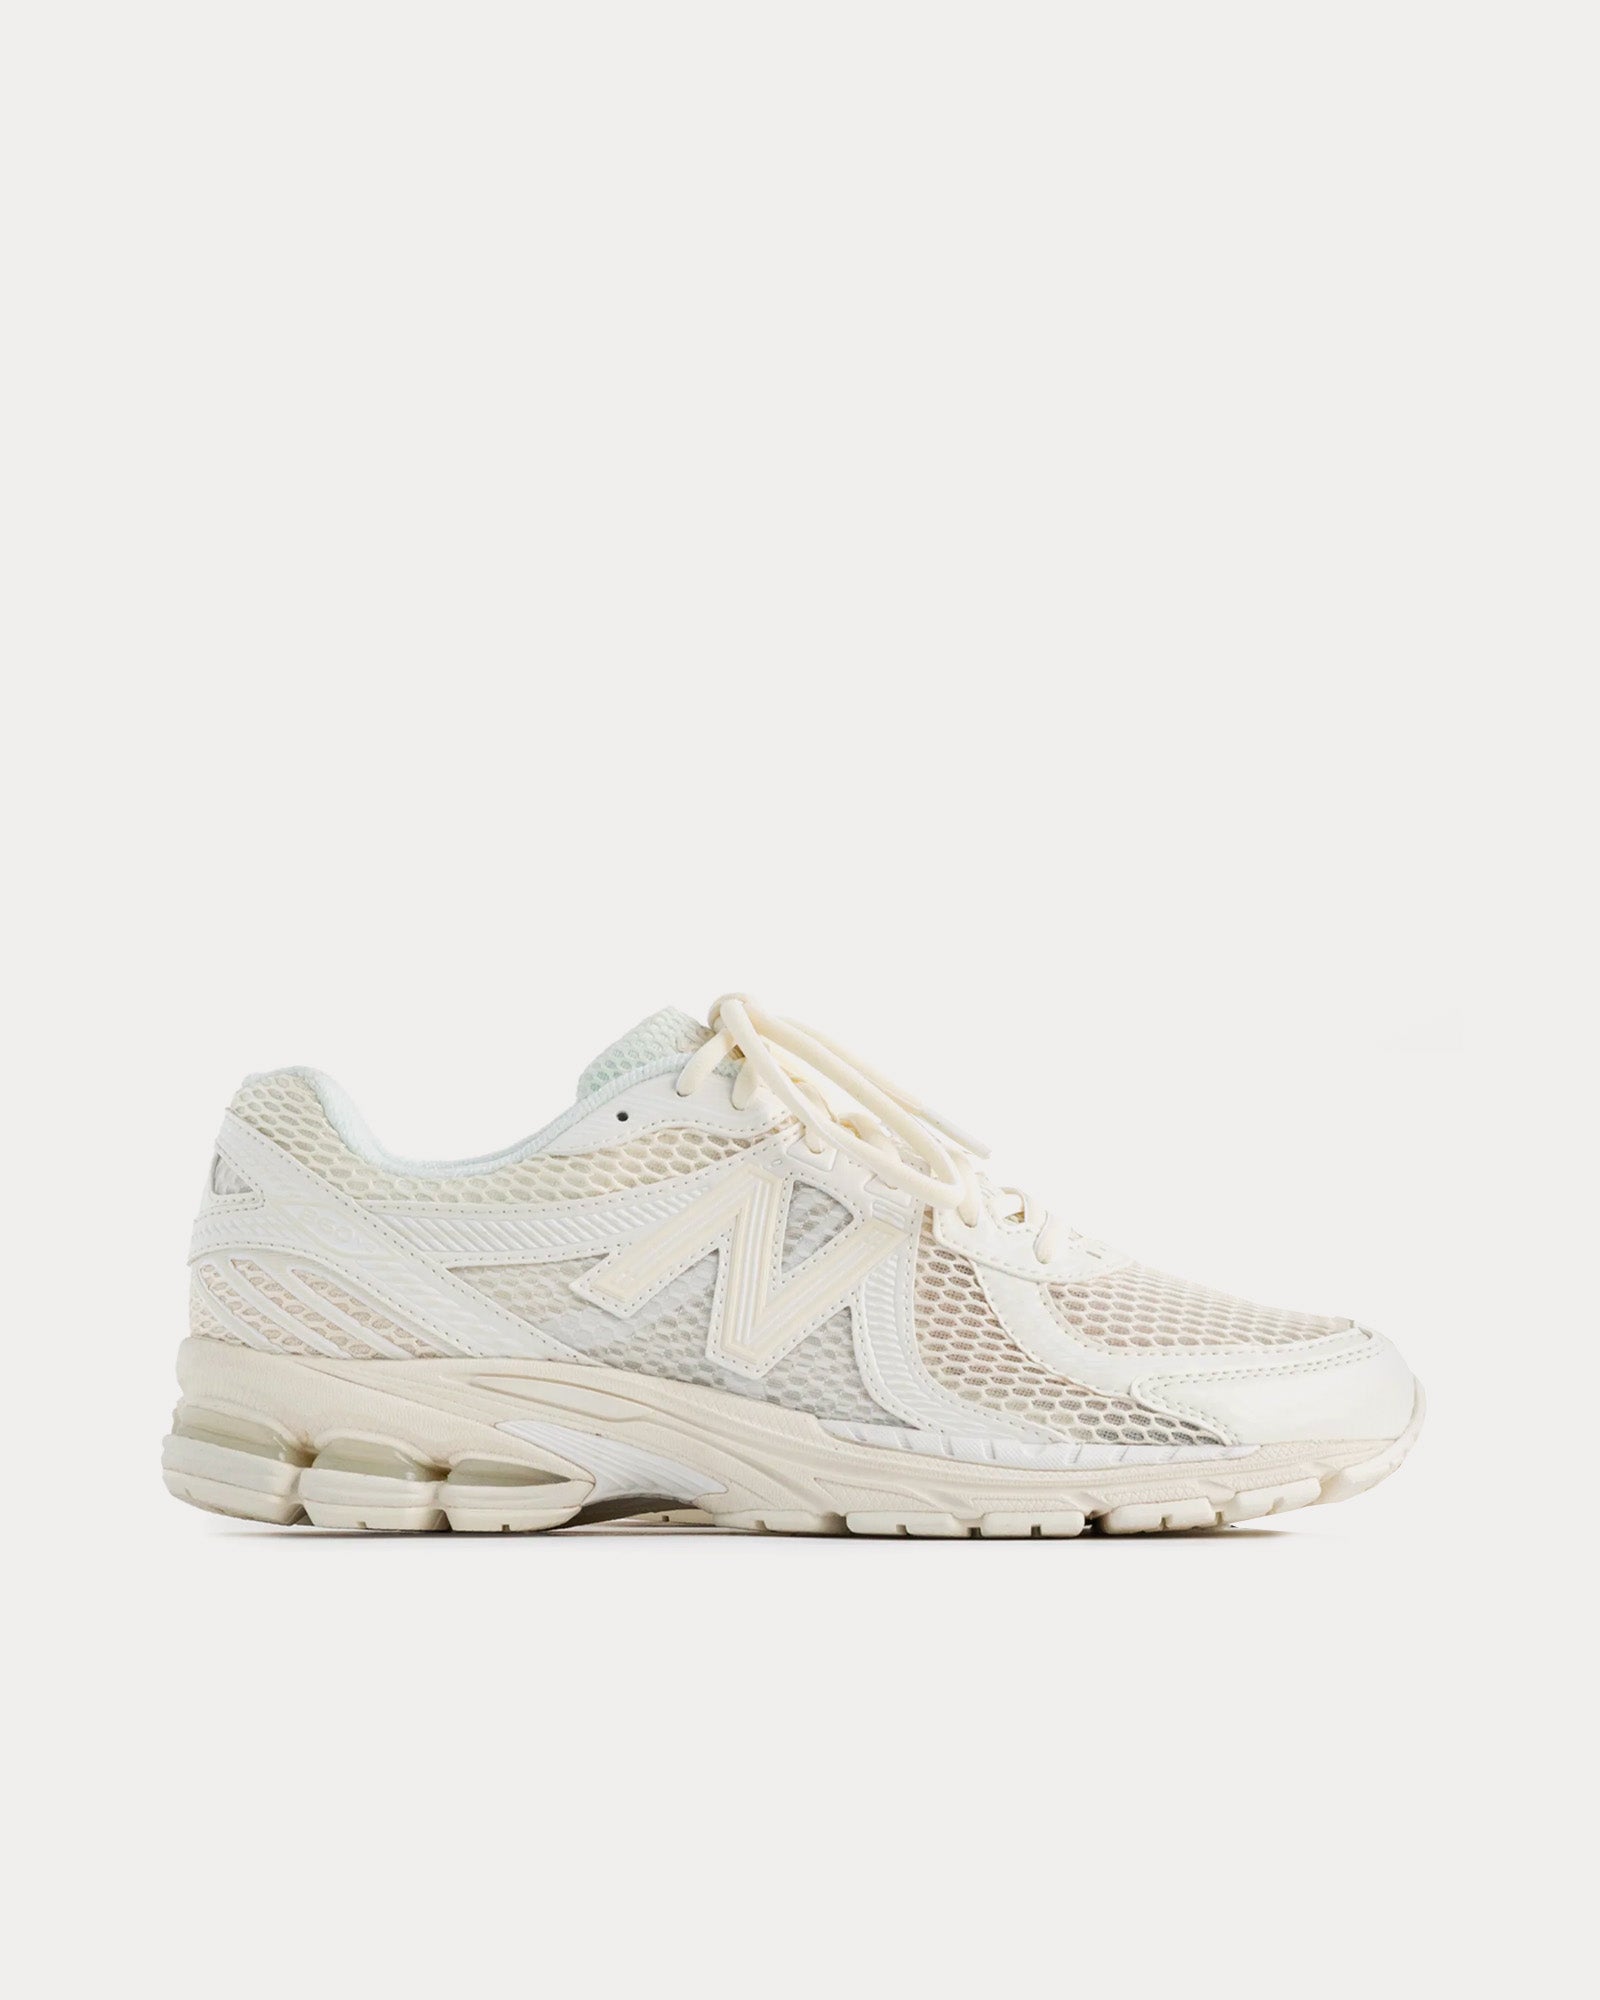 New Balance x Aime Leon Dore - 860v2 White Low Top Sneakers